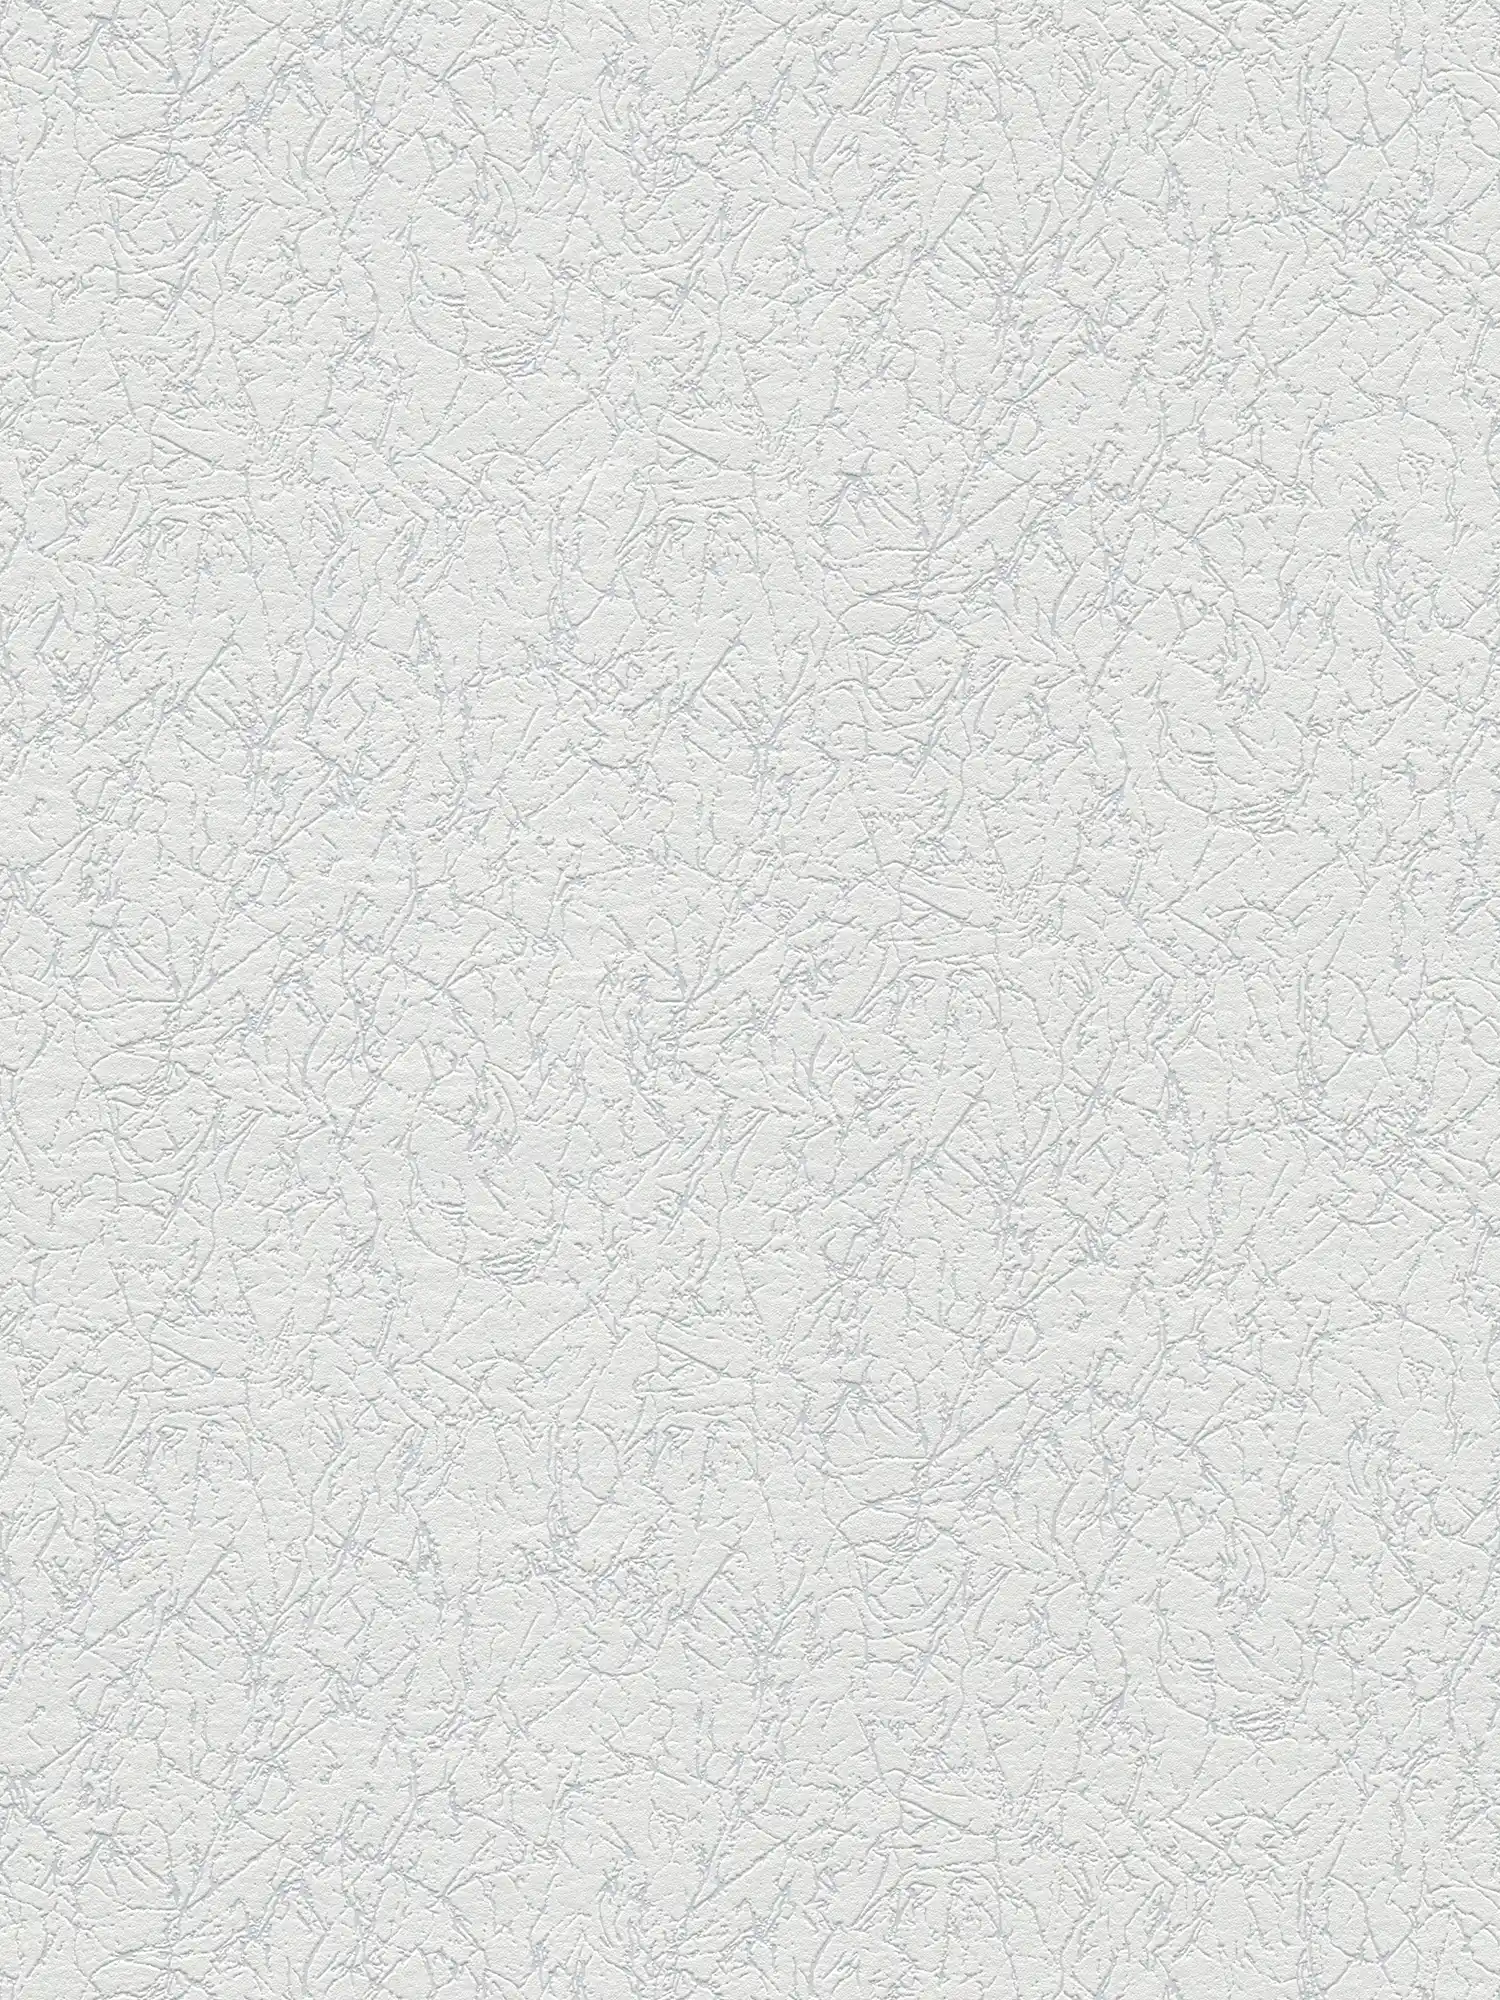 Paintable wallpaper with natural texture pattern - Paintable, White
